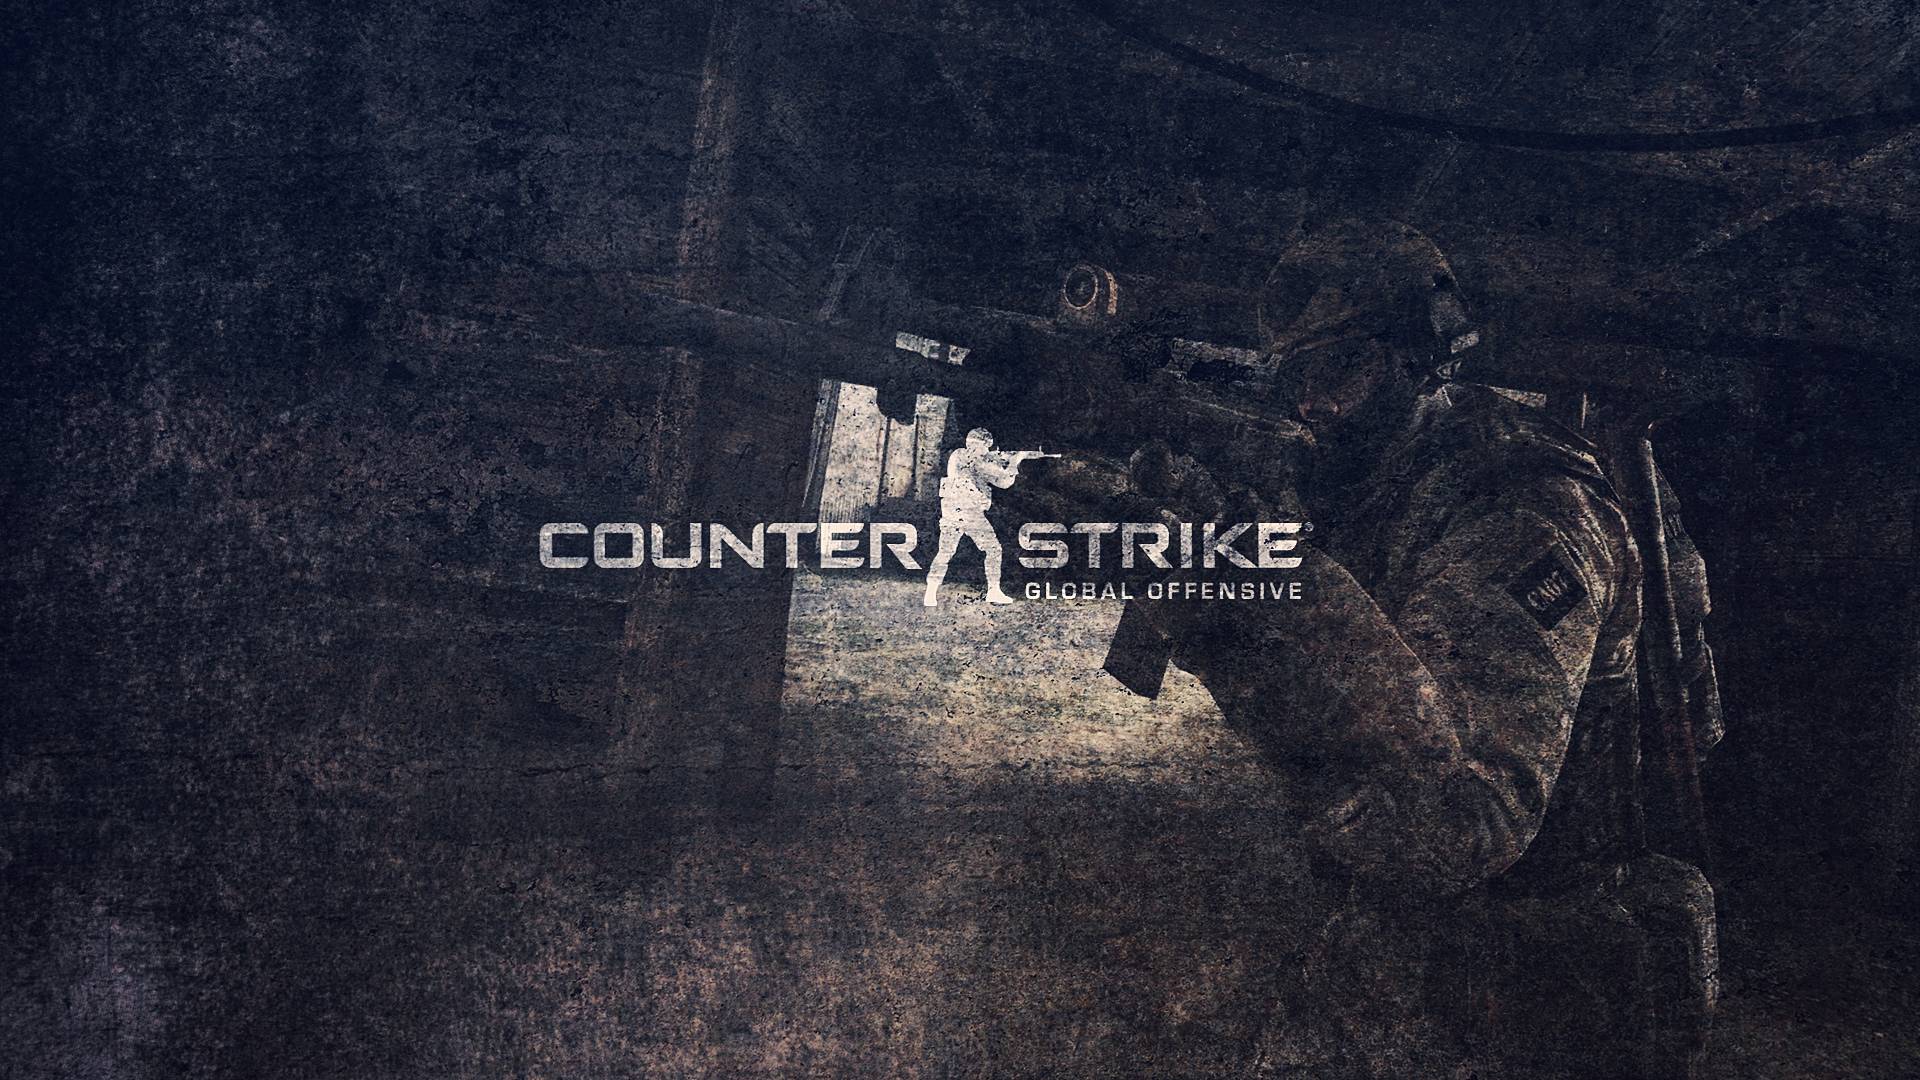 Counter Strike: Global Offensive Wallpaper, Picture, Image